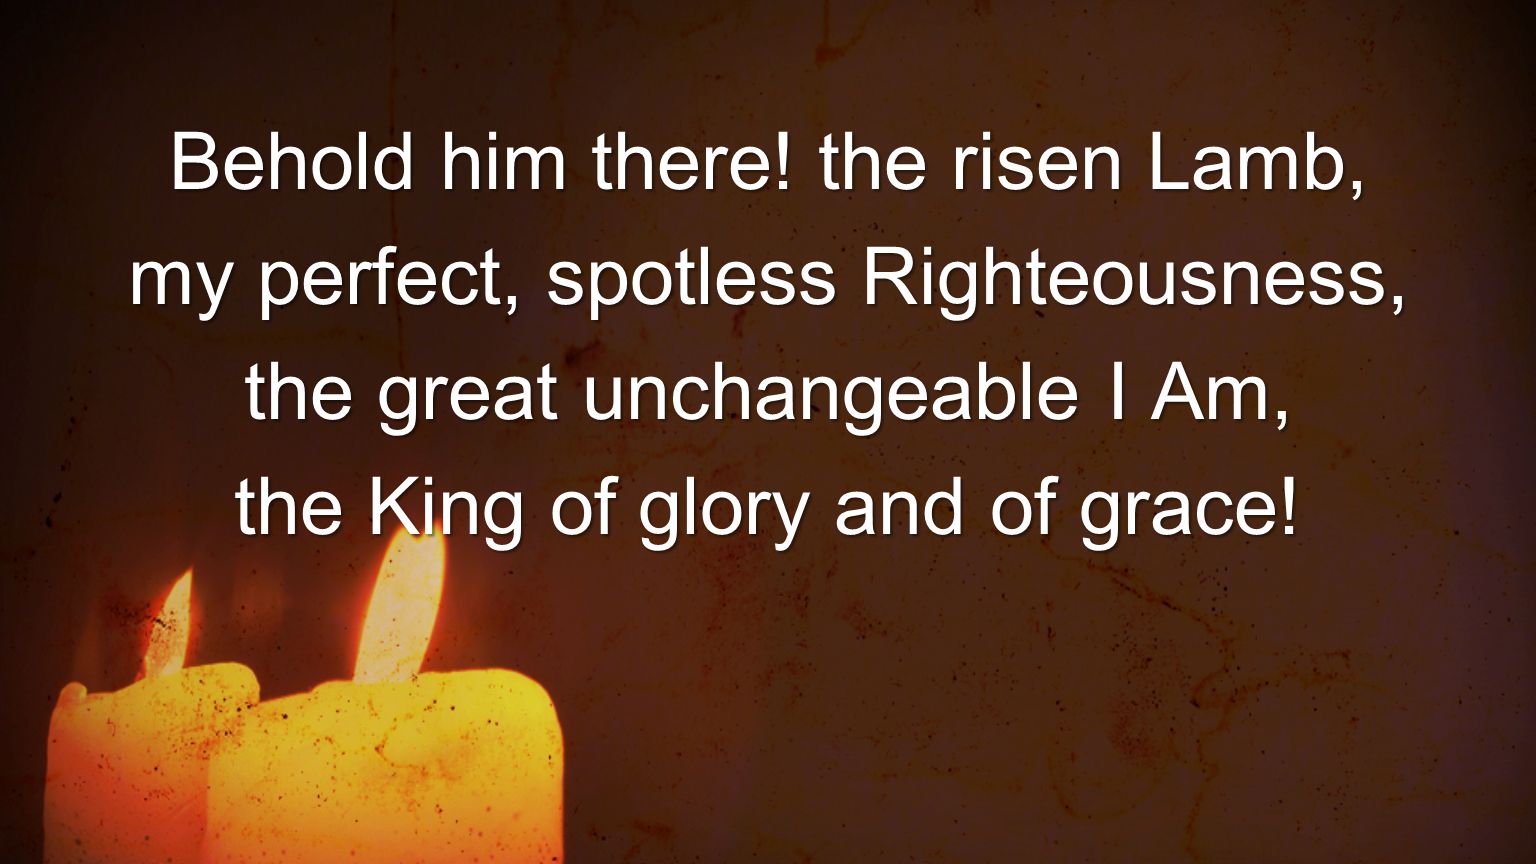 Behold him there! the risen Lamb, my perfect, spotless Righteousness,